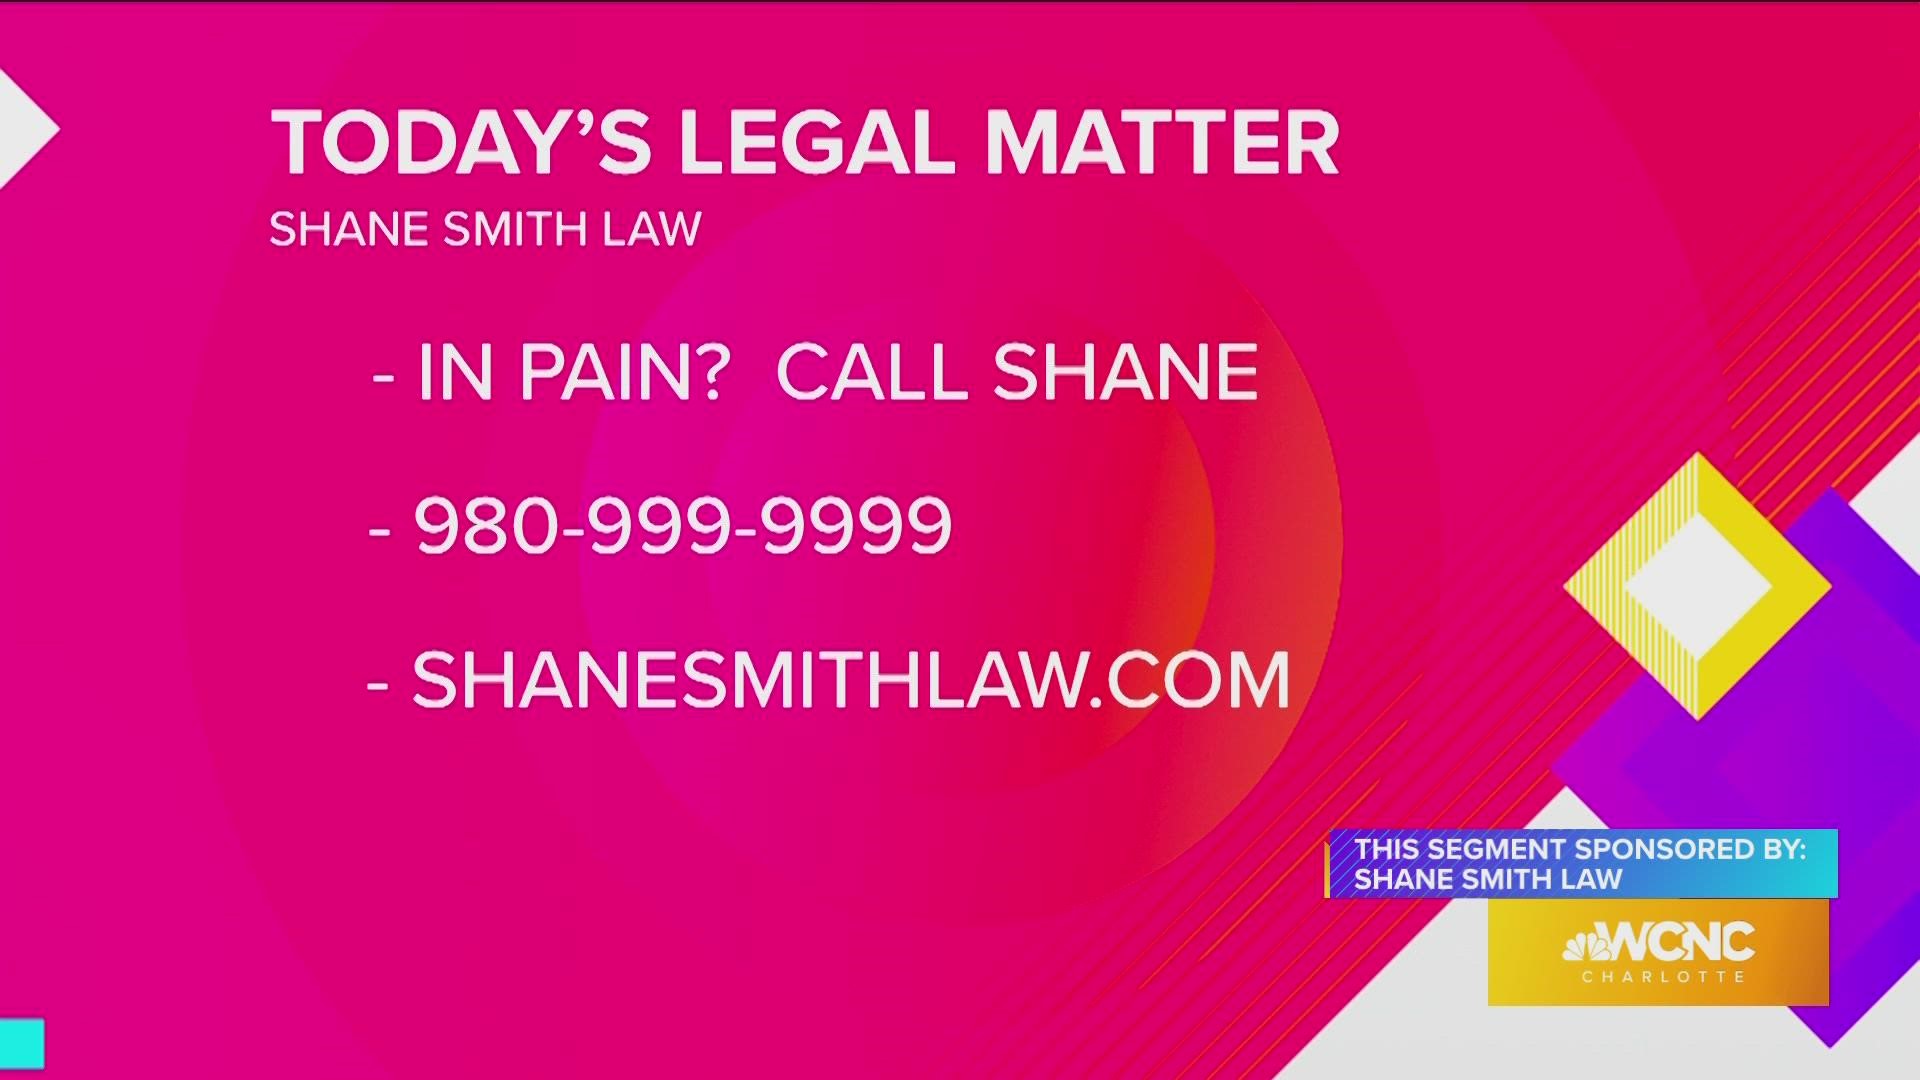 Shane Smith from Shane Smith Law breaks down how important an attorney can be